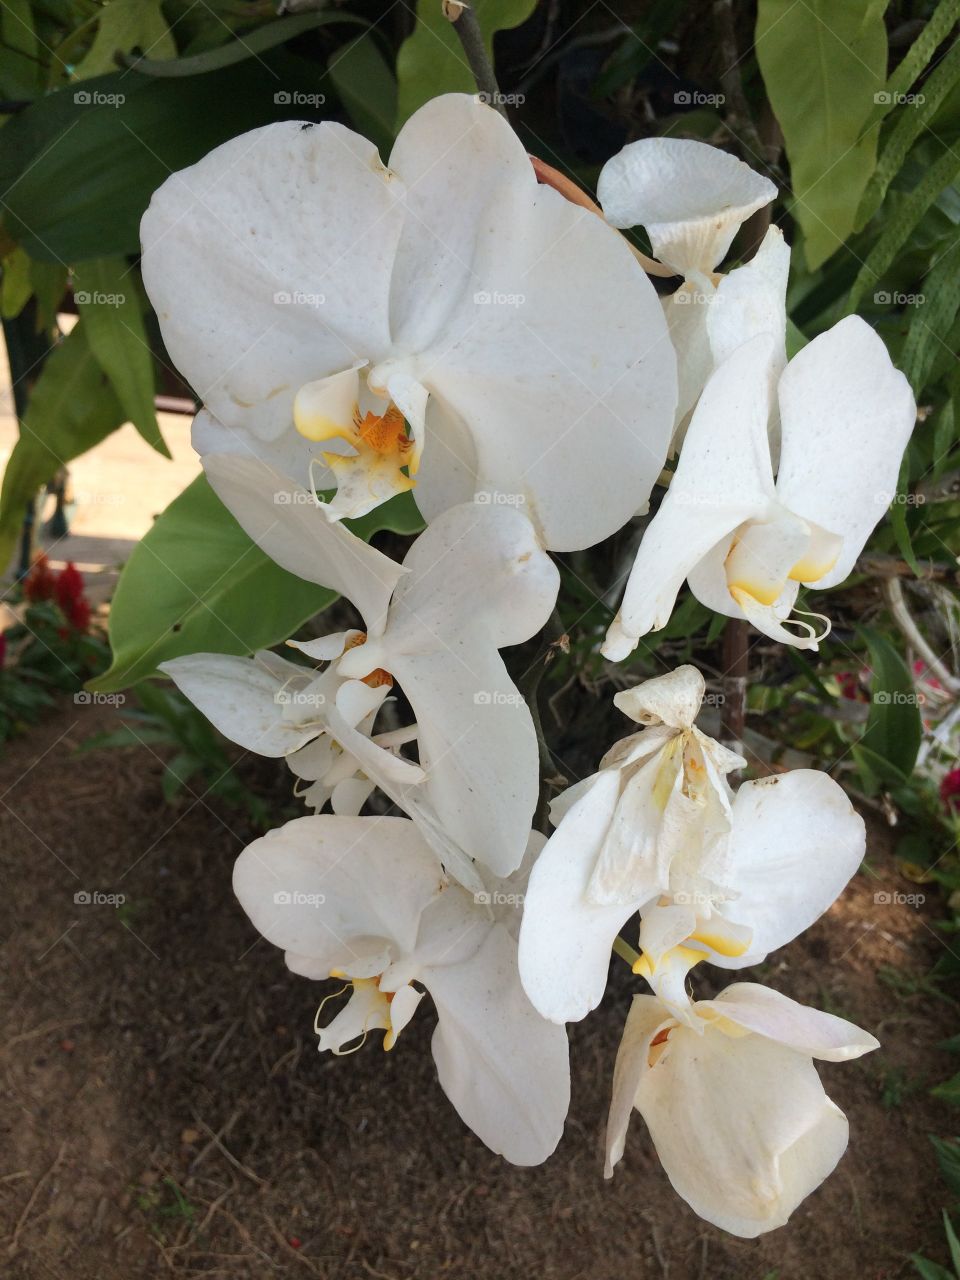 The white Orchid 